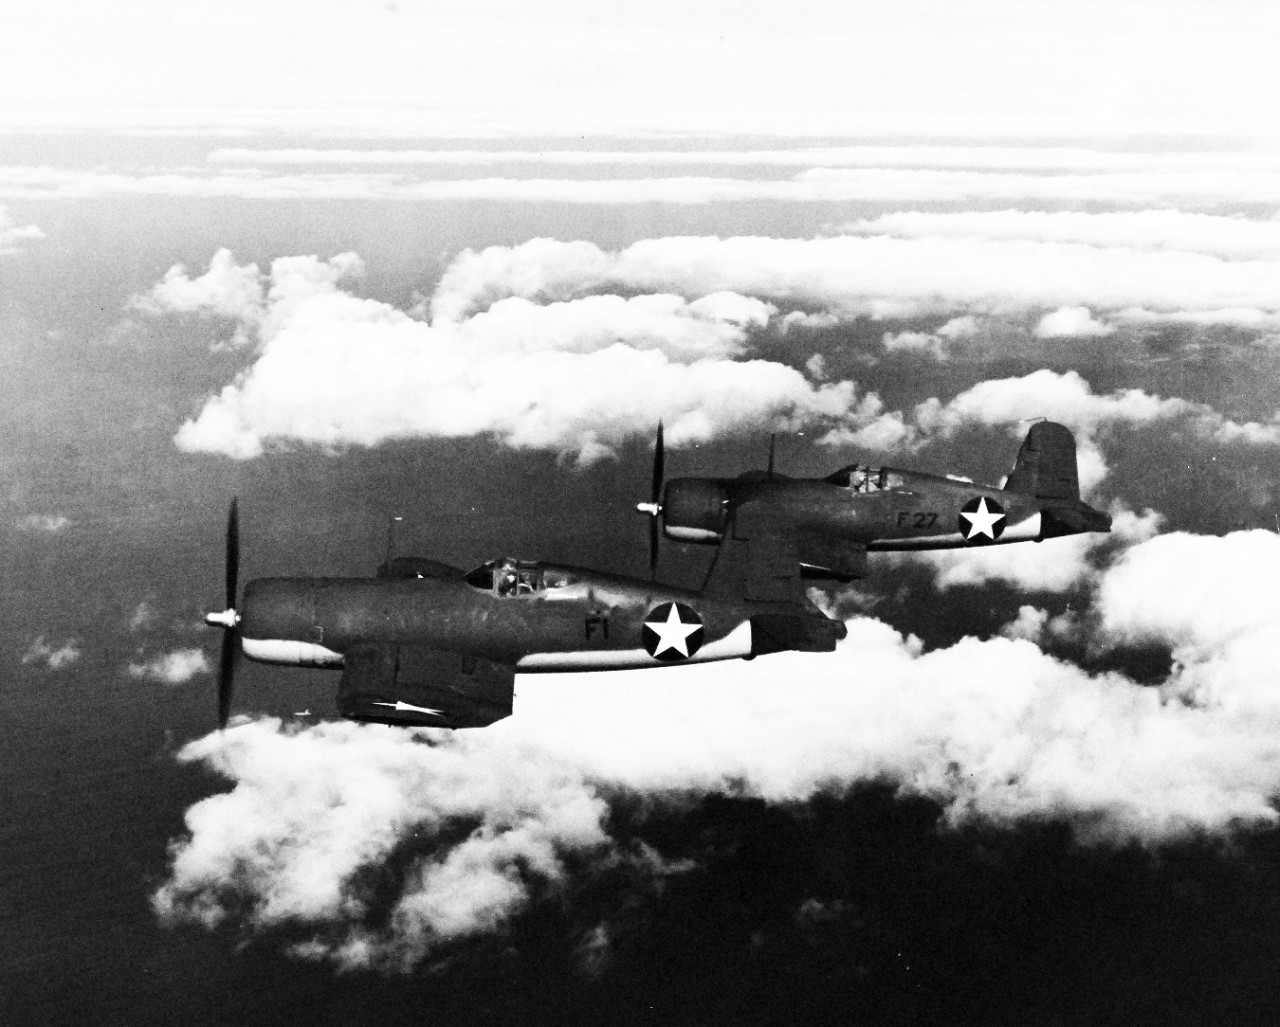 80-G-62033:  Vought F4U Corsair, February 1943.  Corsair is shown in  flight, February 1943.  Official U.S. Navy Photograph, now in the collections of the National Archives.  